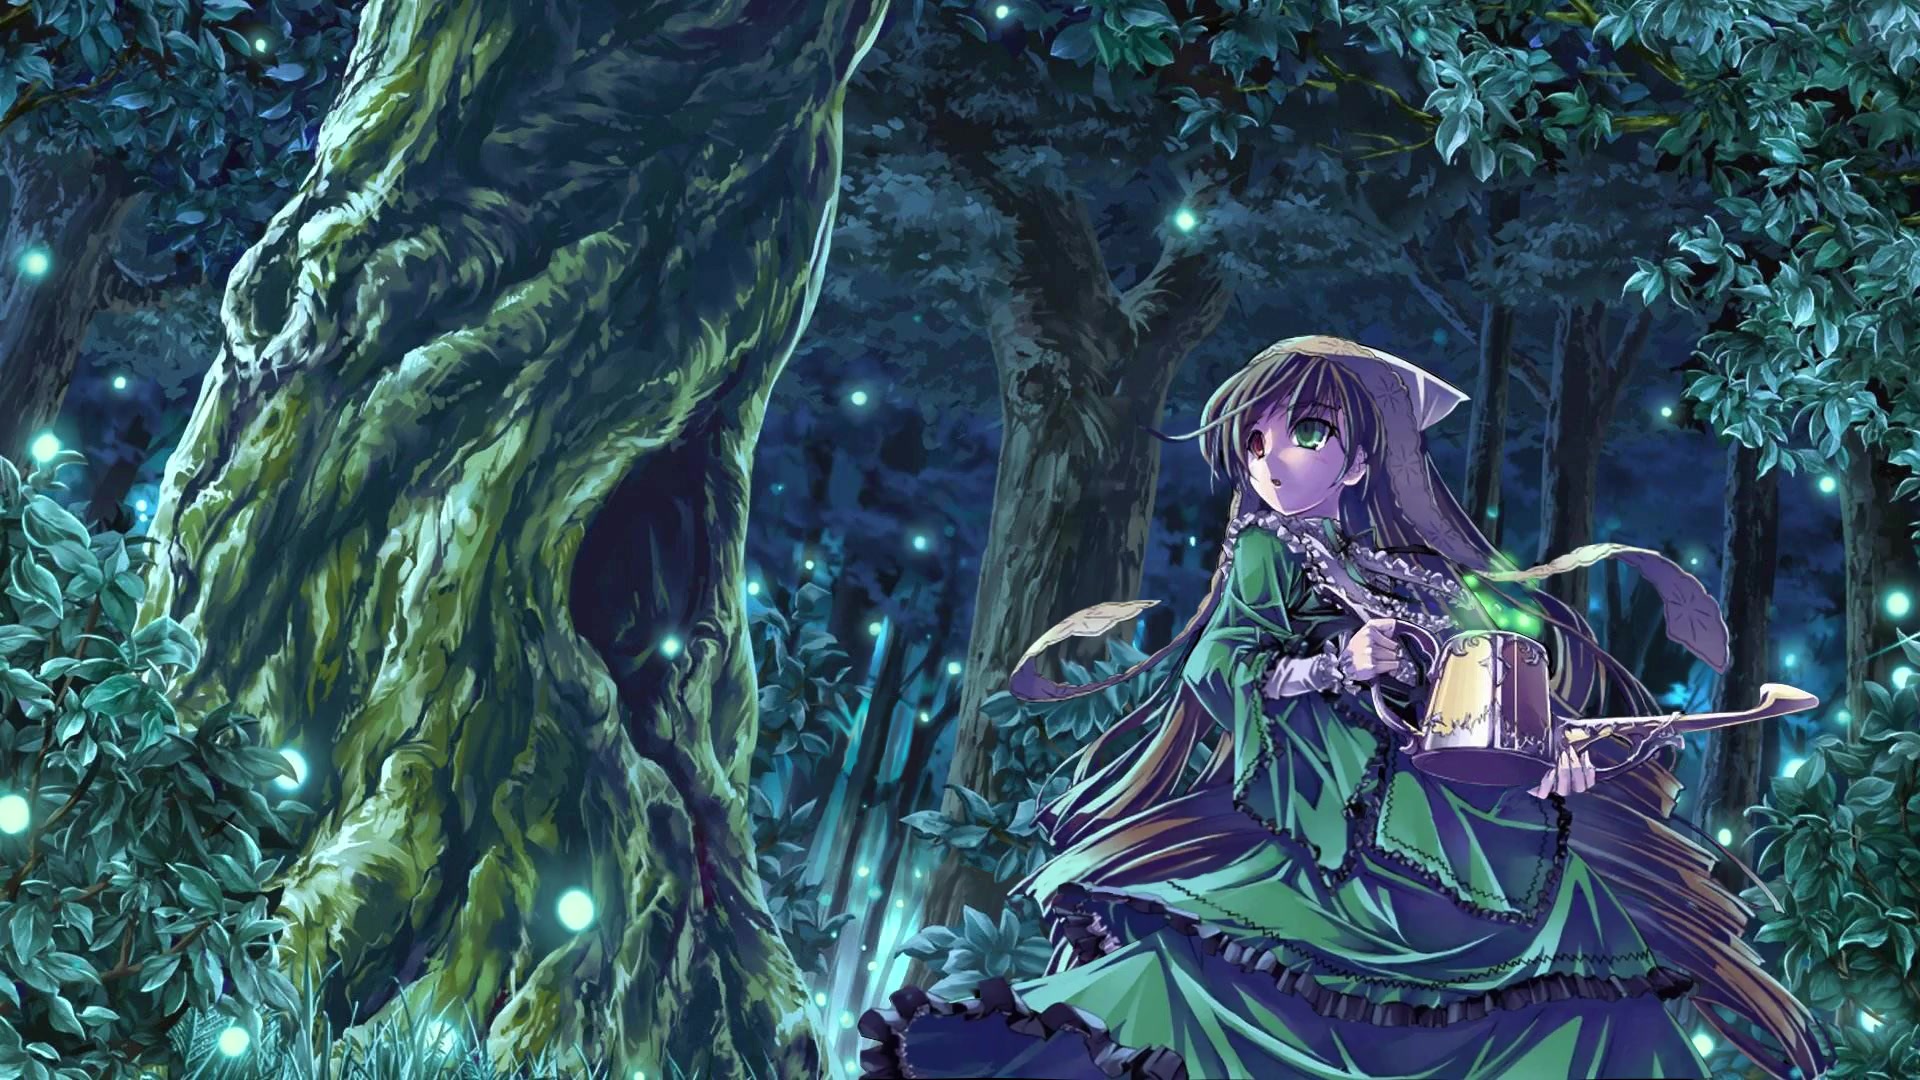 Anime Girl In Forest Live Wallpaper 3dlwp